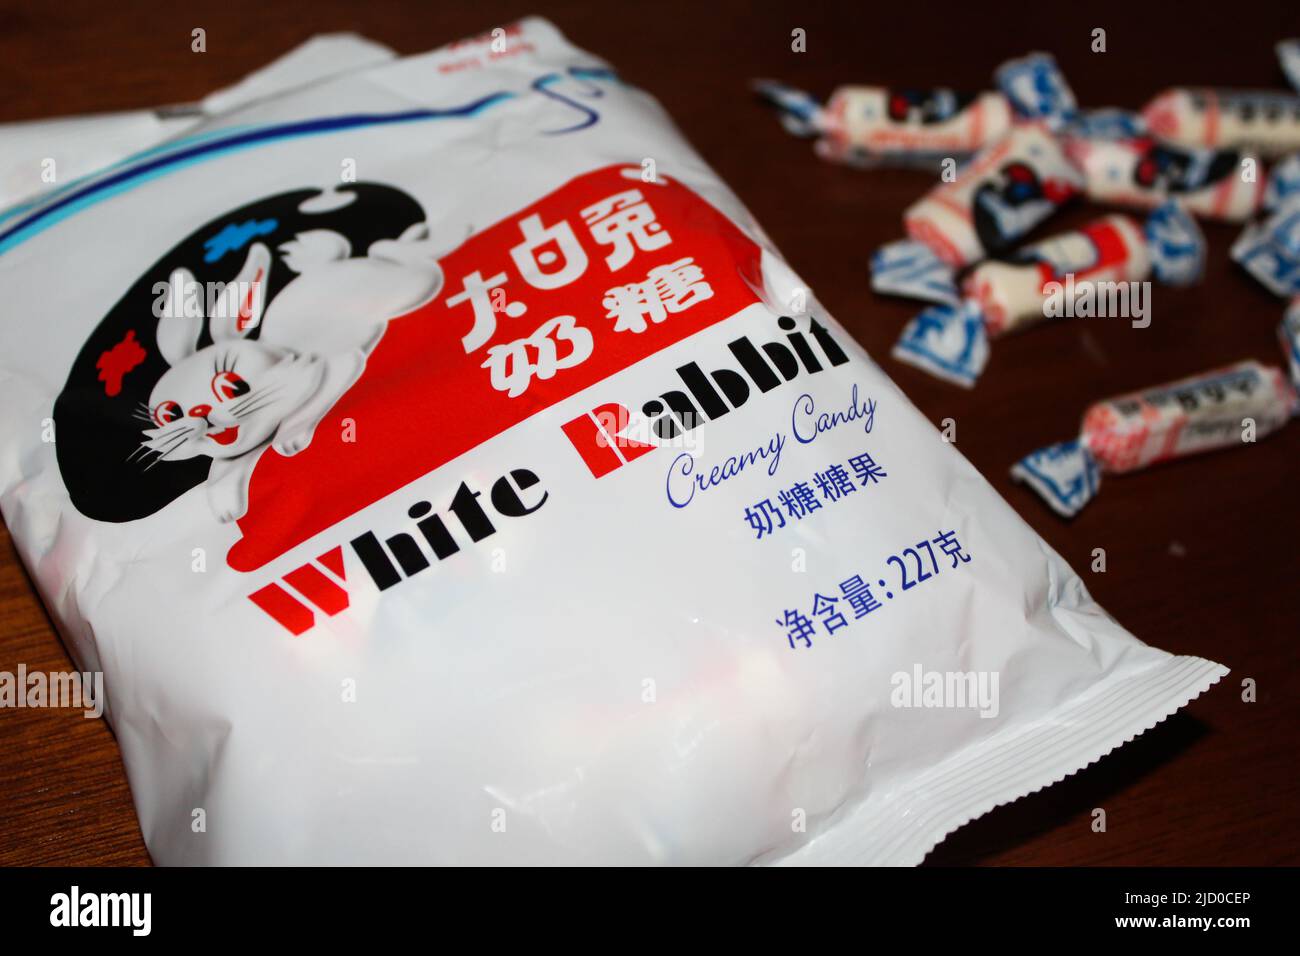 Side view of White Rabbit Creamy Candy which is a brand of milk candy manufactured by Shanghai Guan Sheng Yuan Food, Ltd., in China. Famous candy. Stock Photo